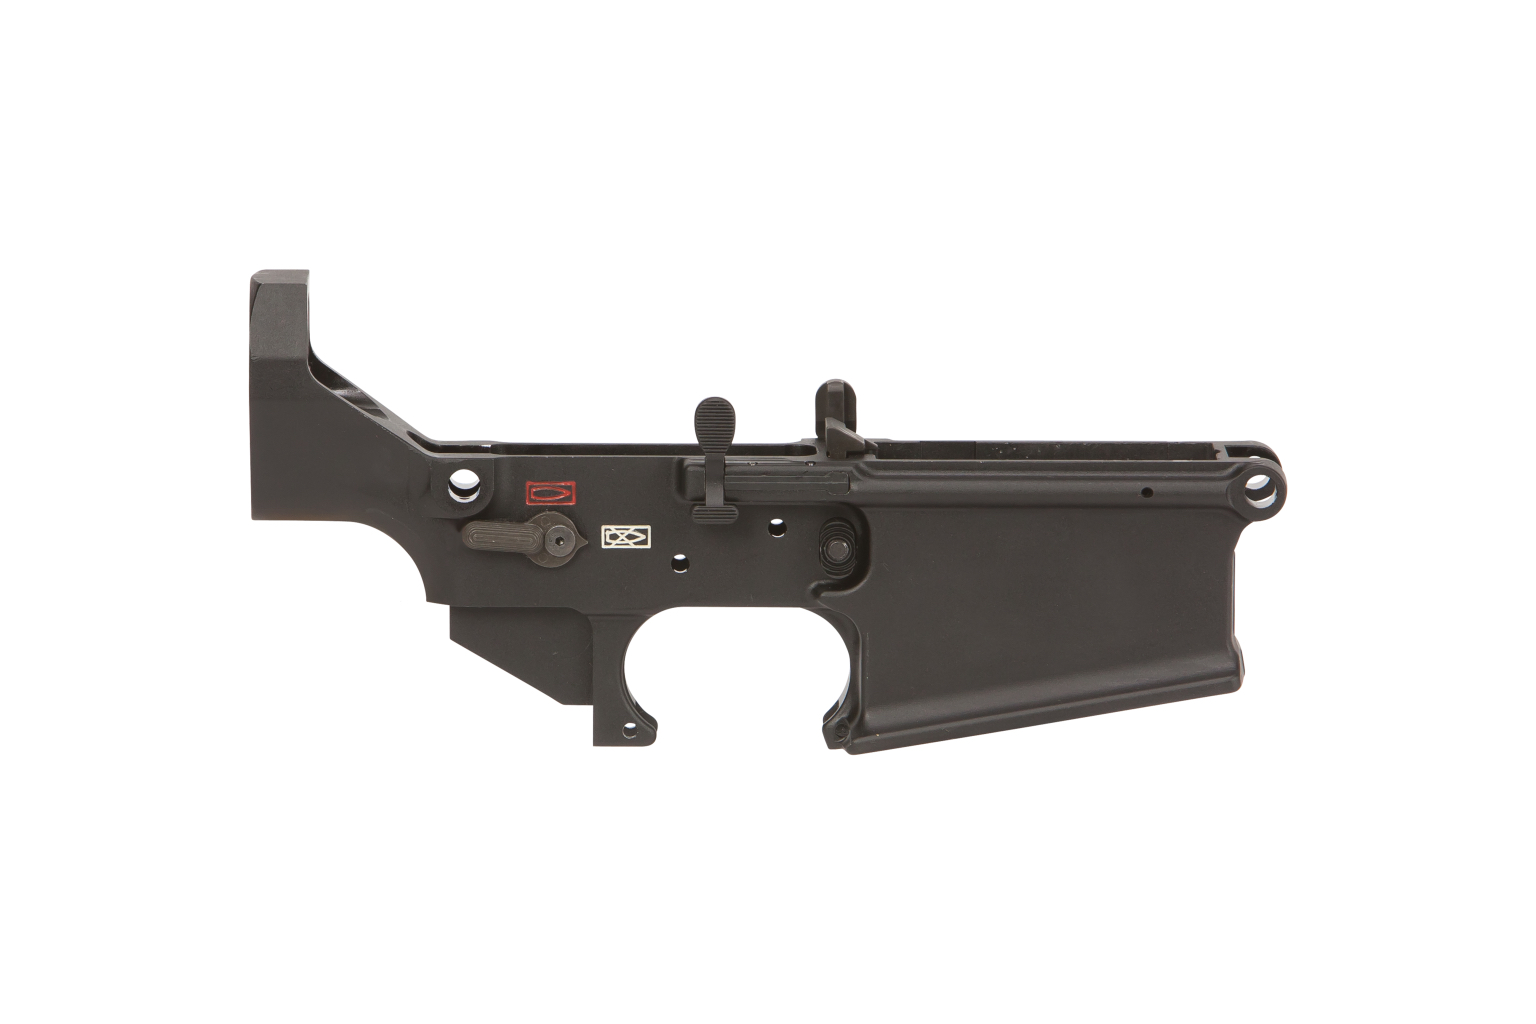 LMT MARS-H 308 Stripped Lower (with ambi controls installed)